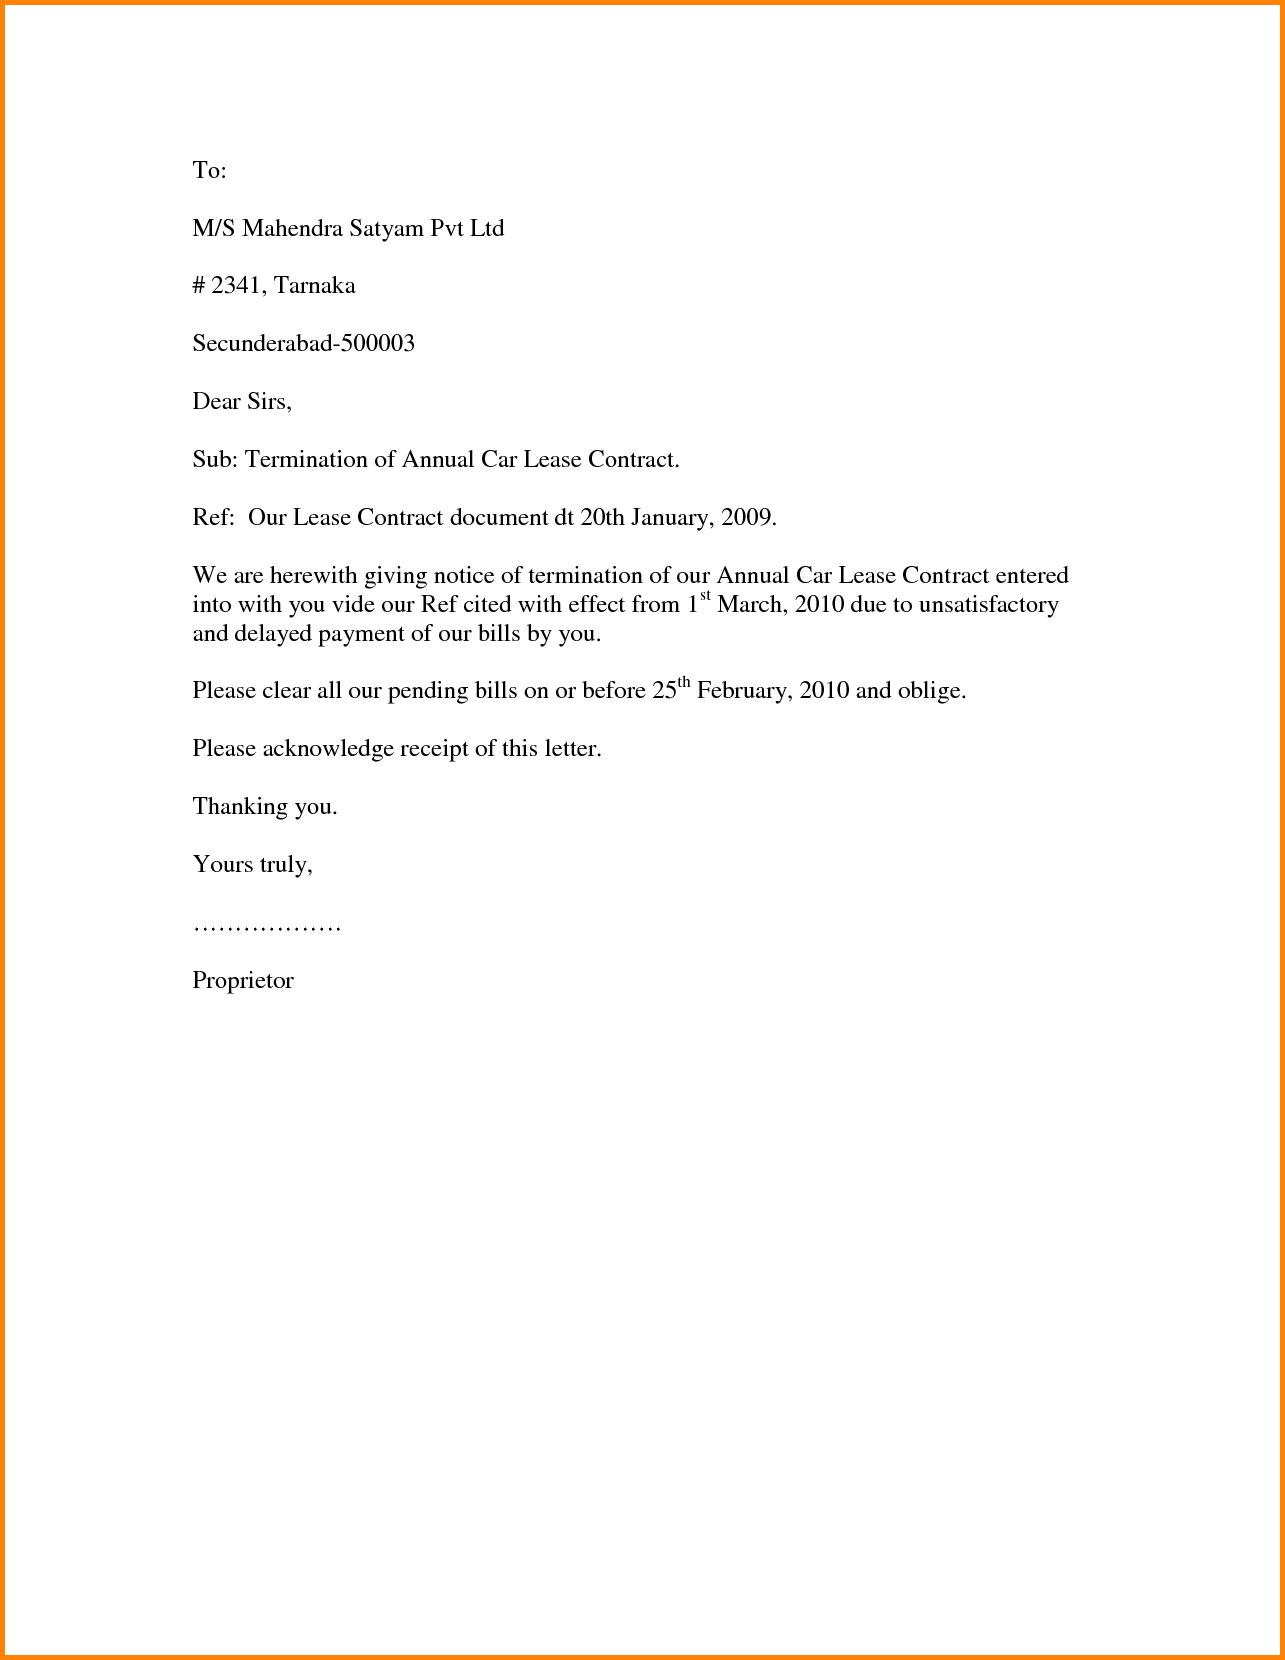 tenancy notice letter template example-Letter Template To End A Contract Copy Contract Letter Work Sample 12-e